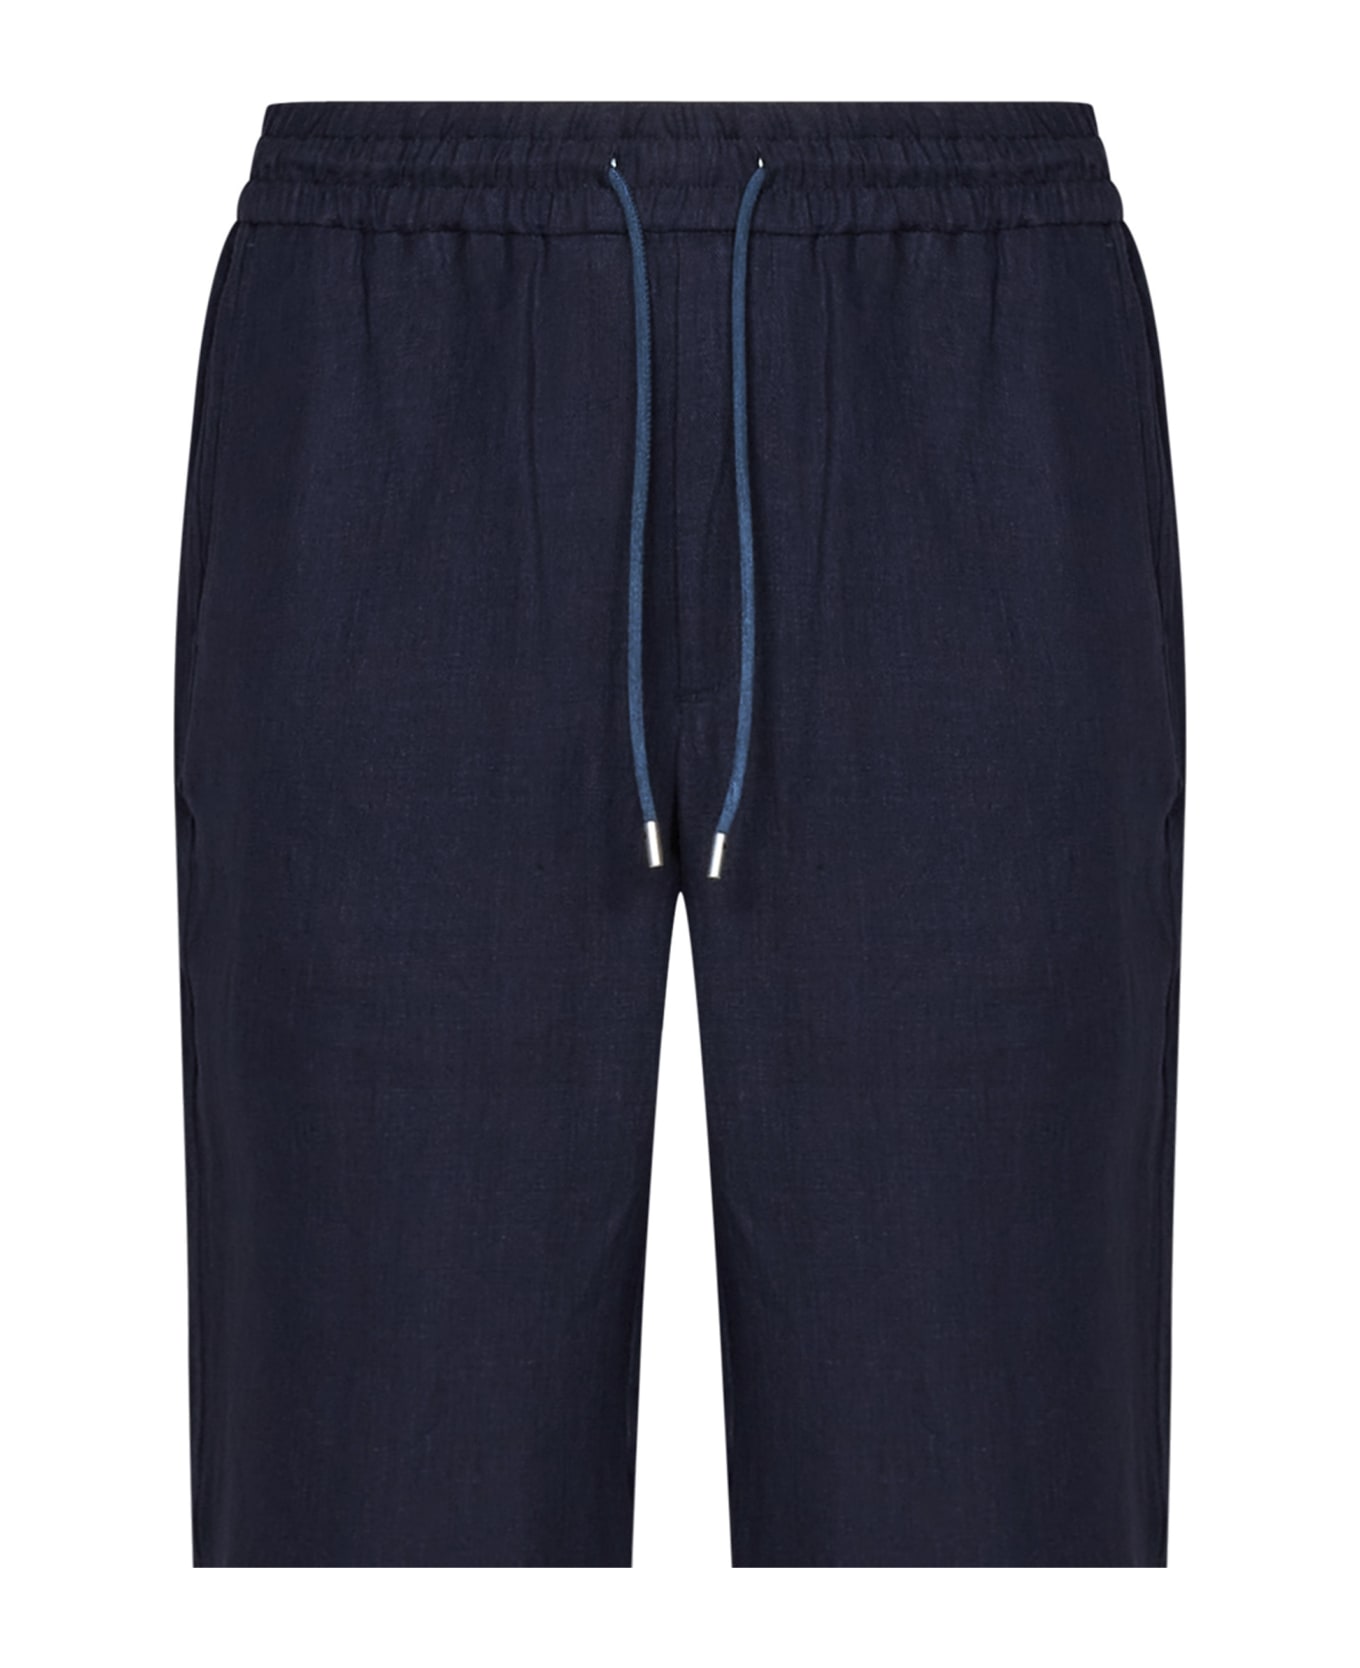 Sease Summer Mindset Trousers - Blue ボトムス